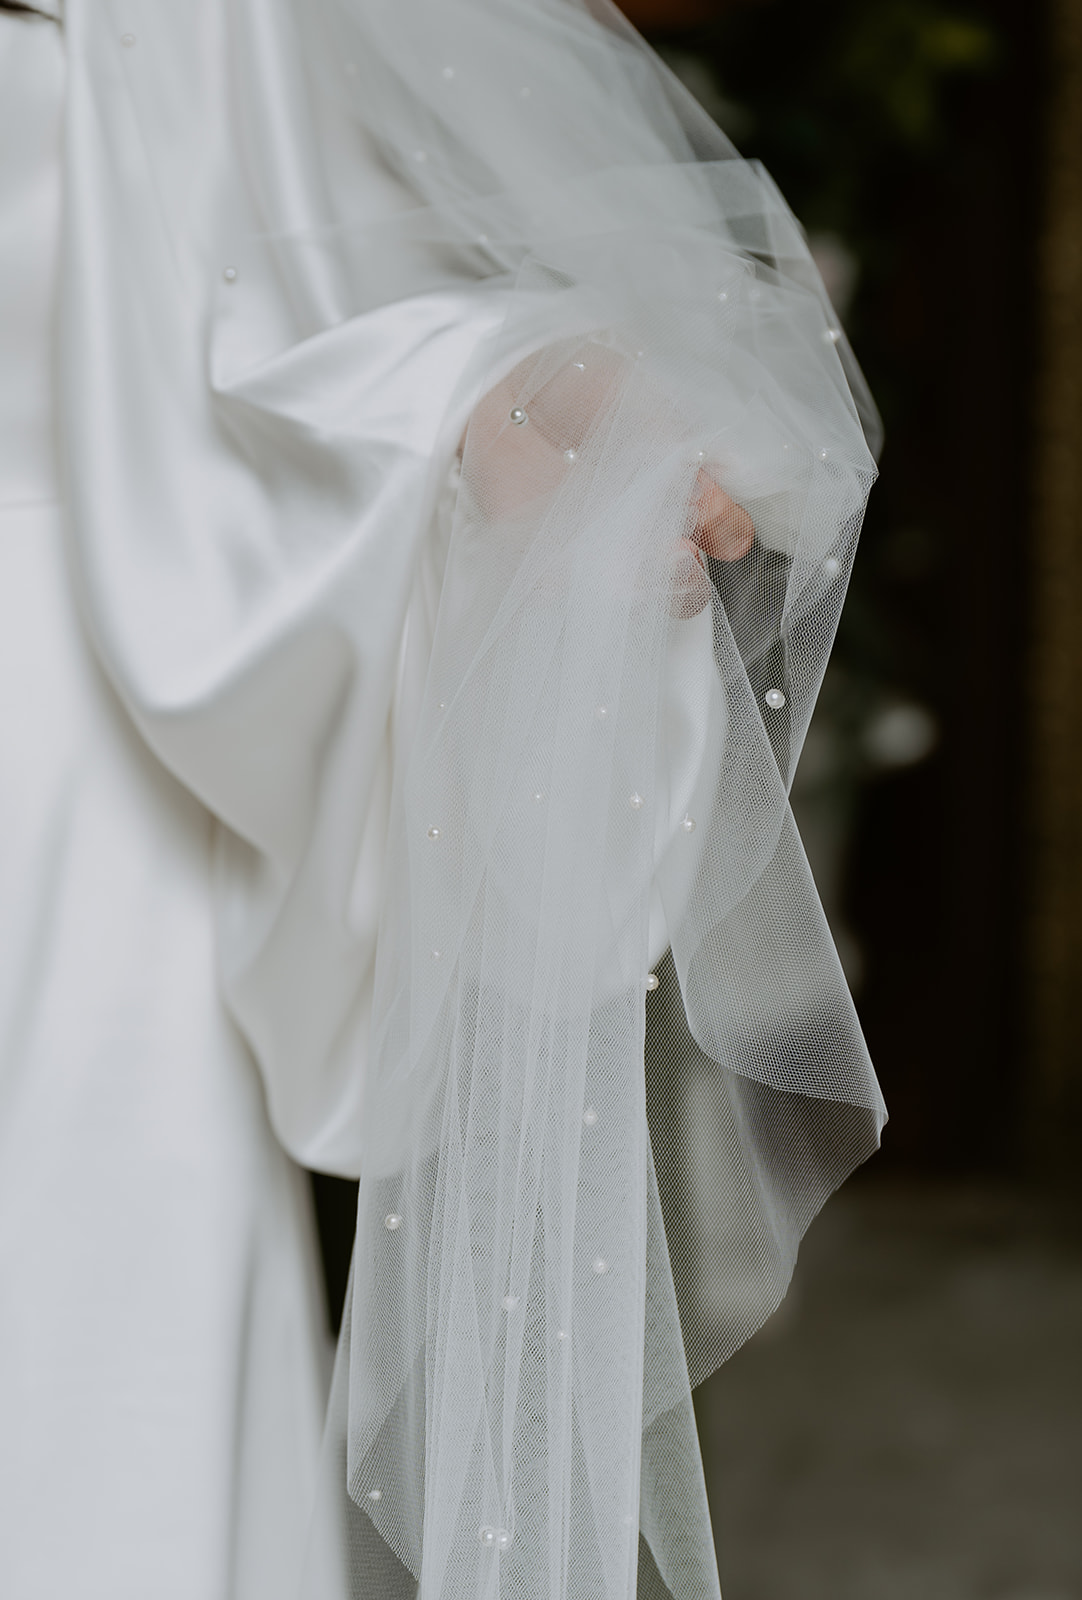 A bride adjusts her white veil adorned with pearls, her hand visible beneath the translucent fabric, with a natural back